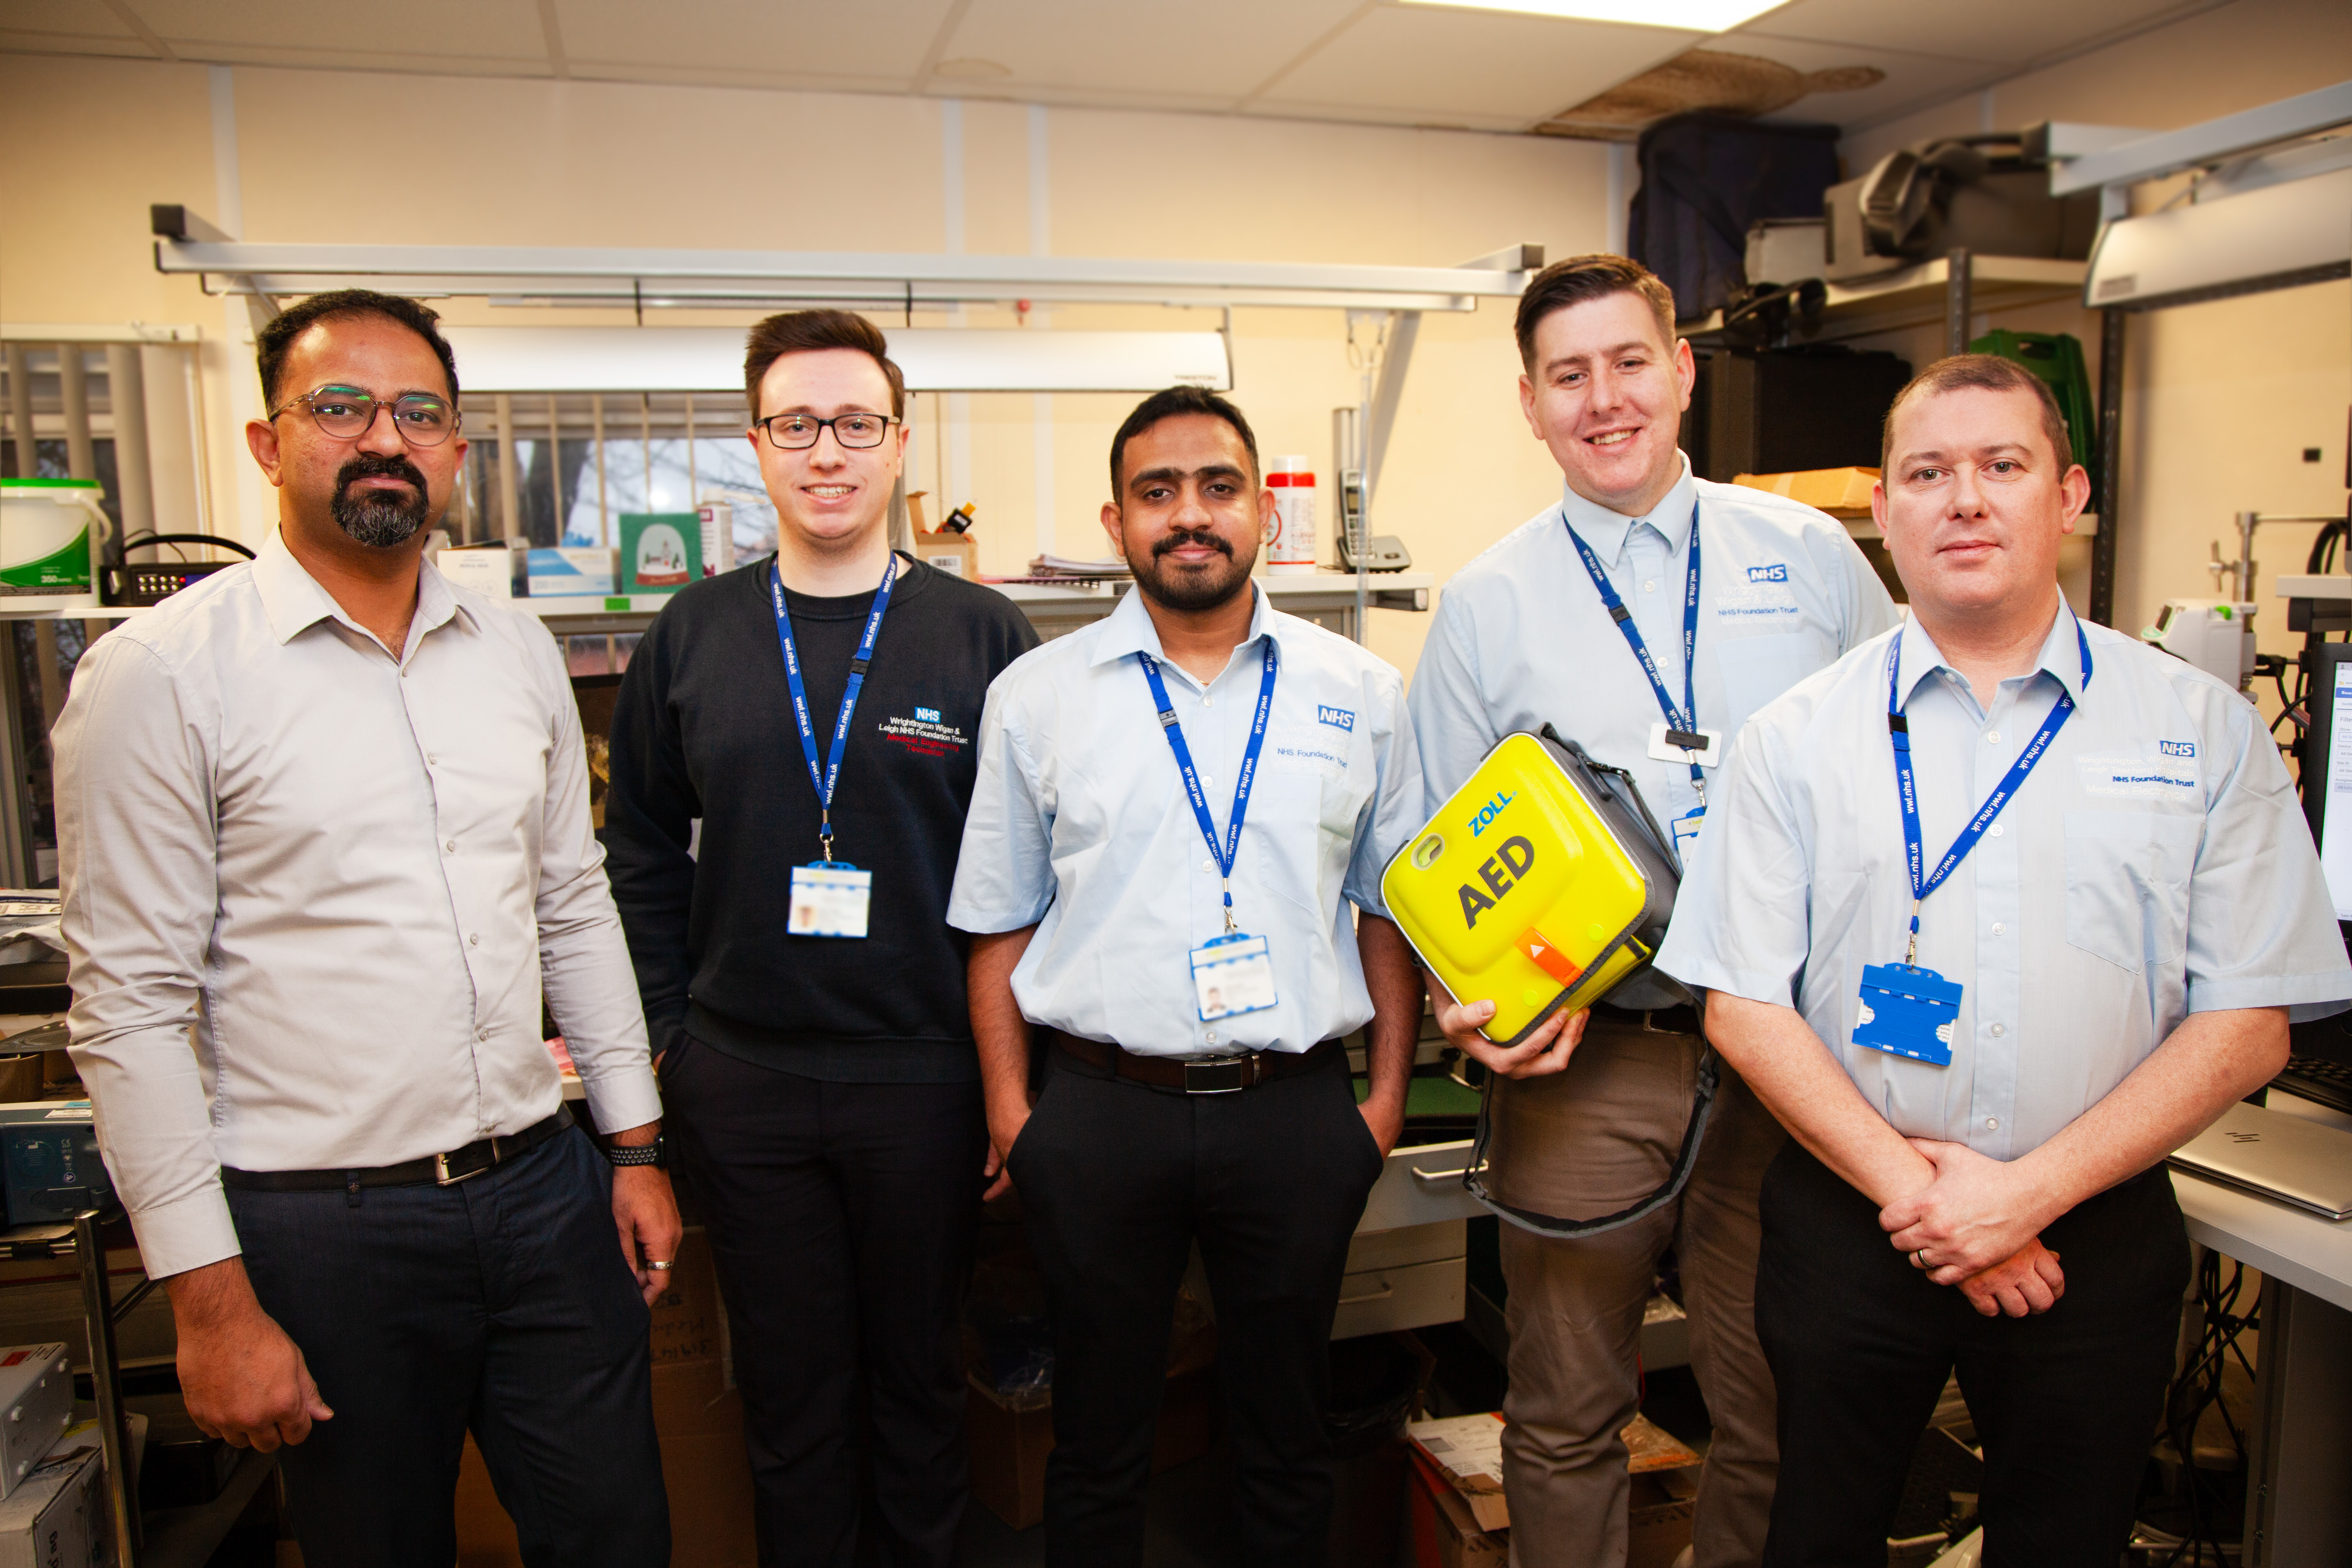 The Medical Electronics Team at WWL, with one member of staff holding a defibrillator